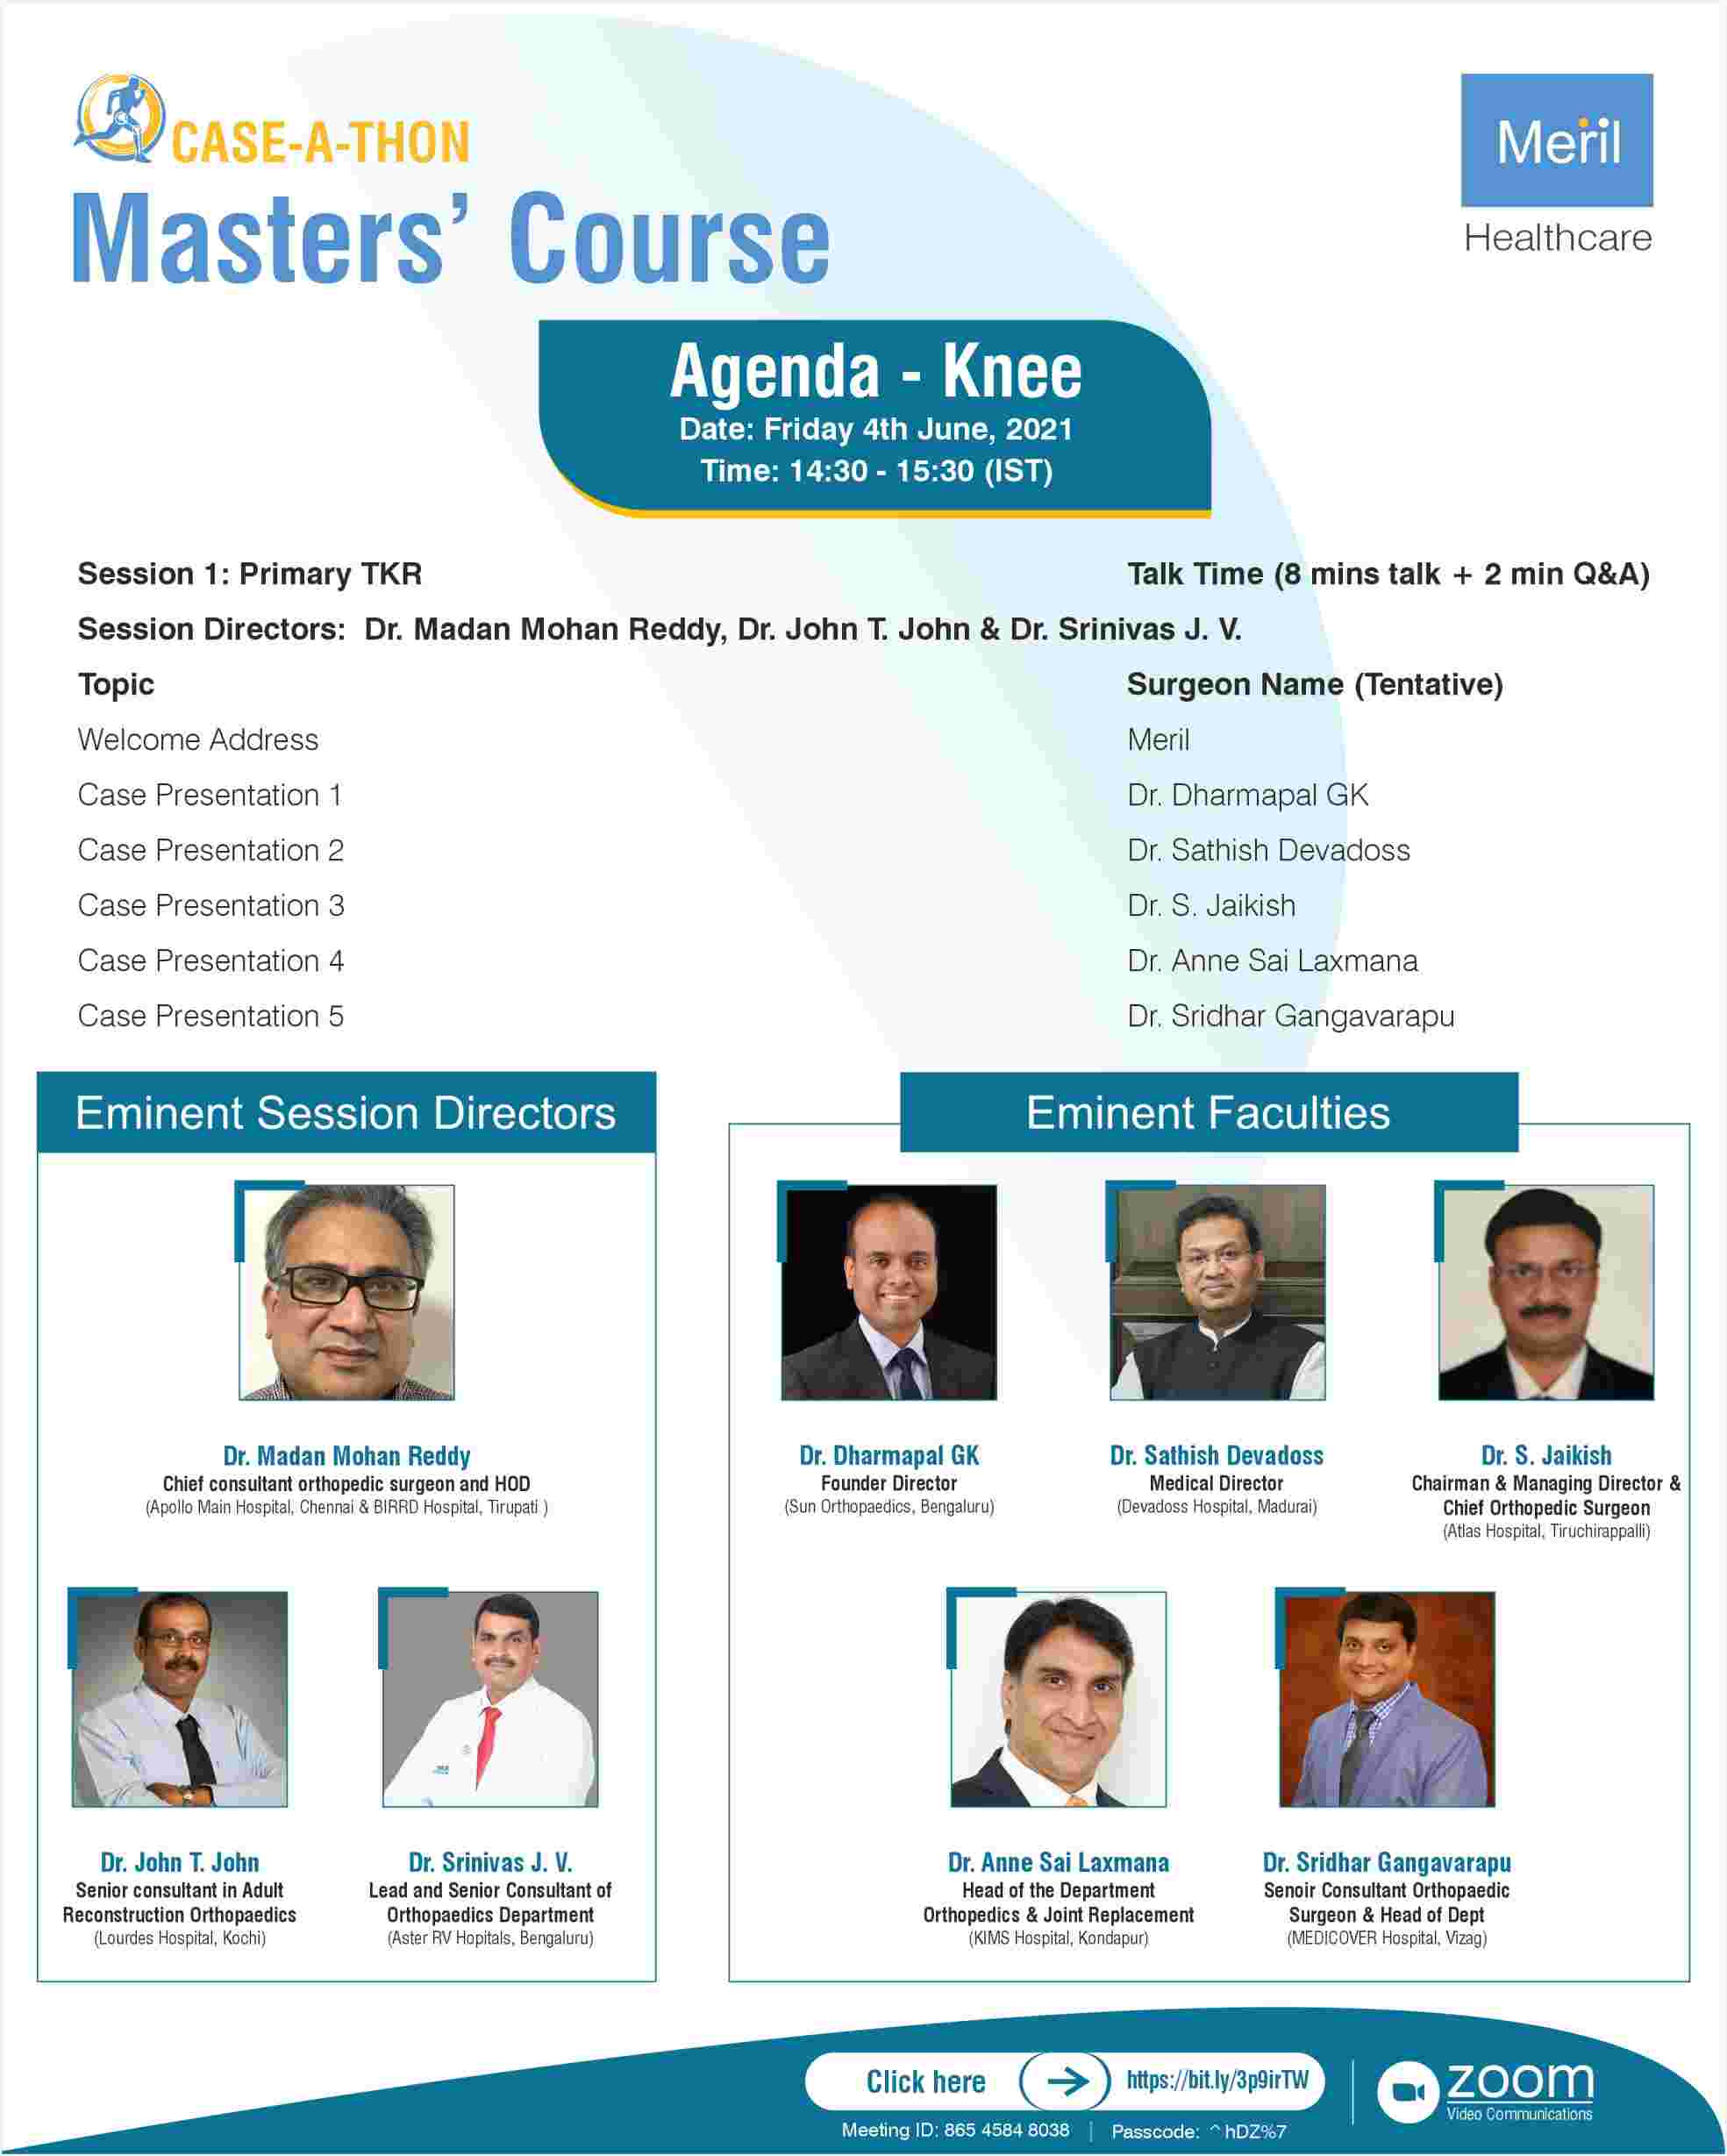 Masters' Course- Case -A- Thon